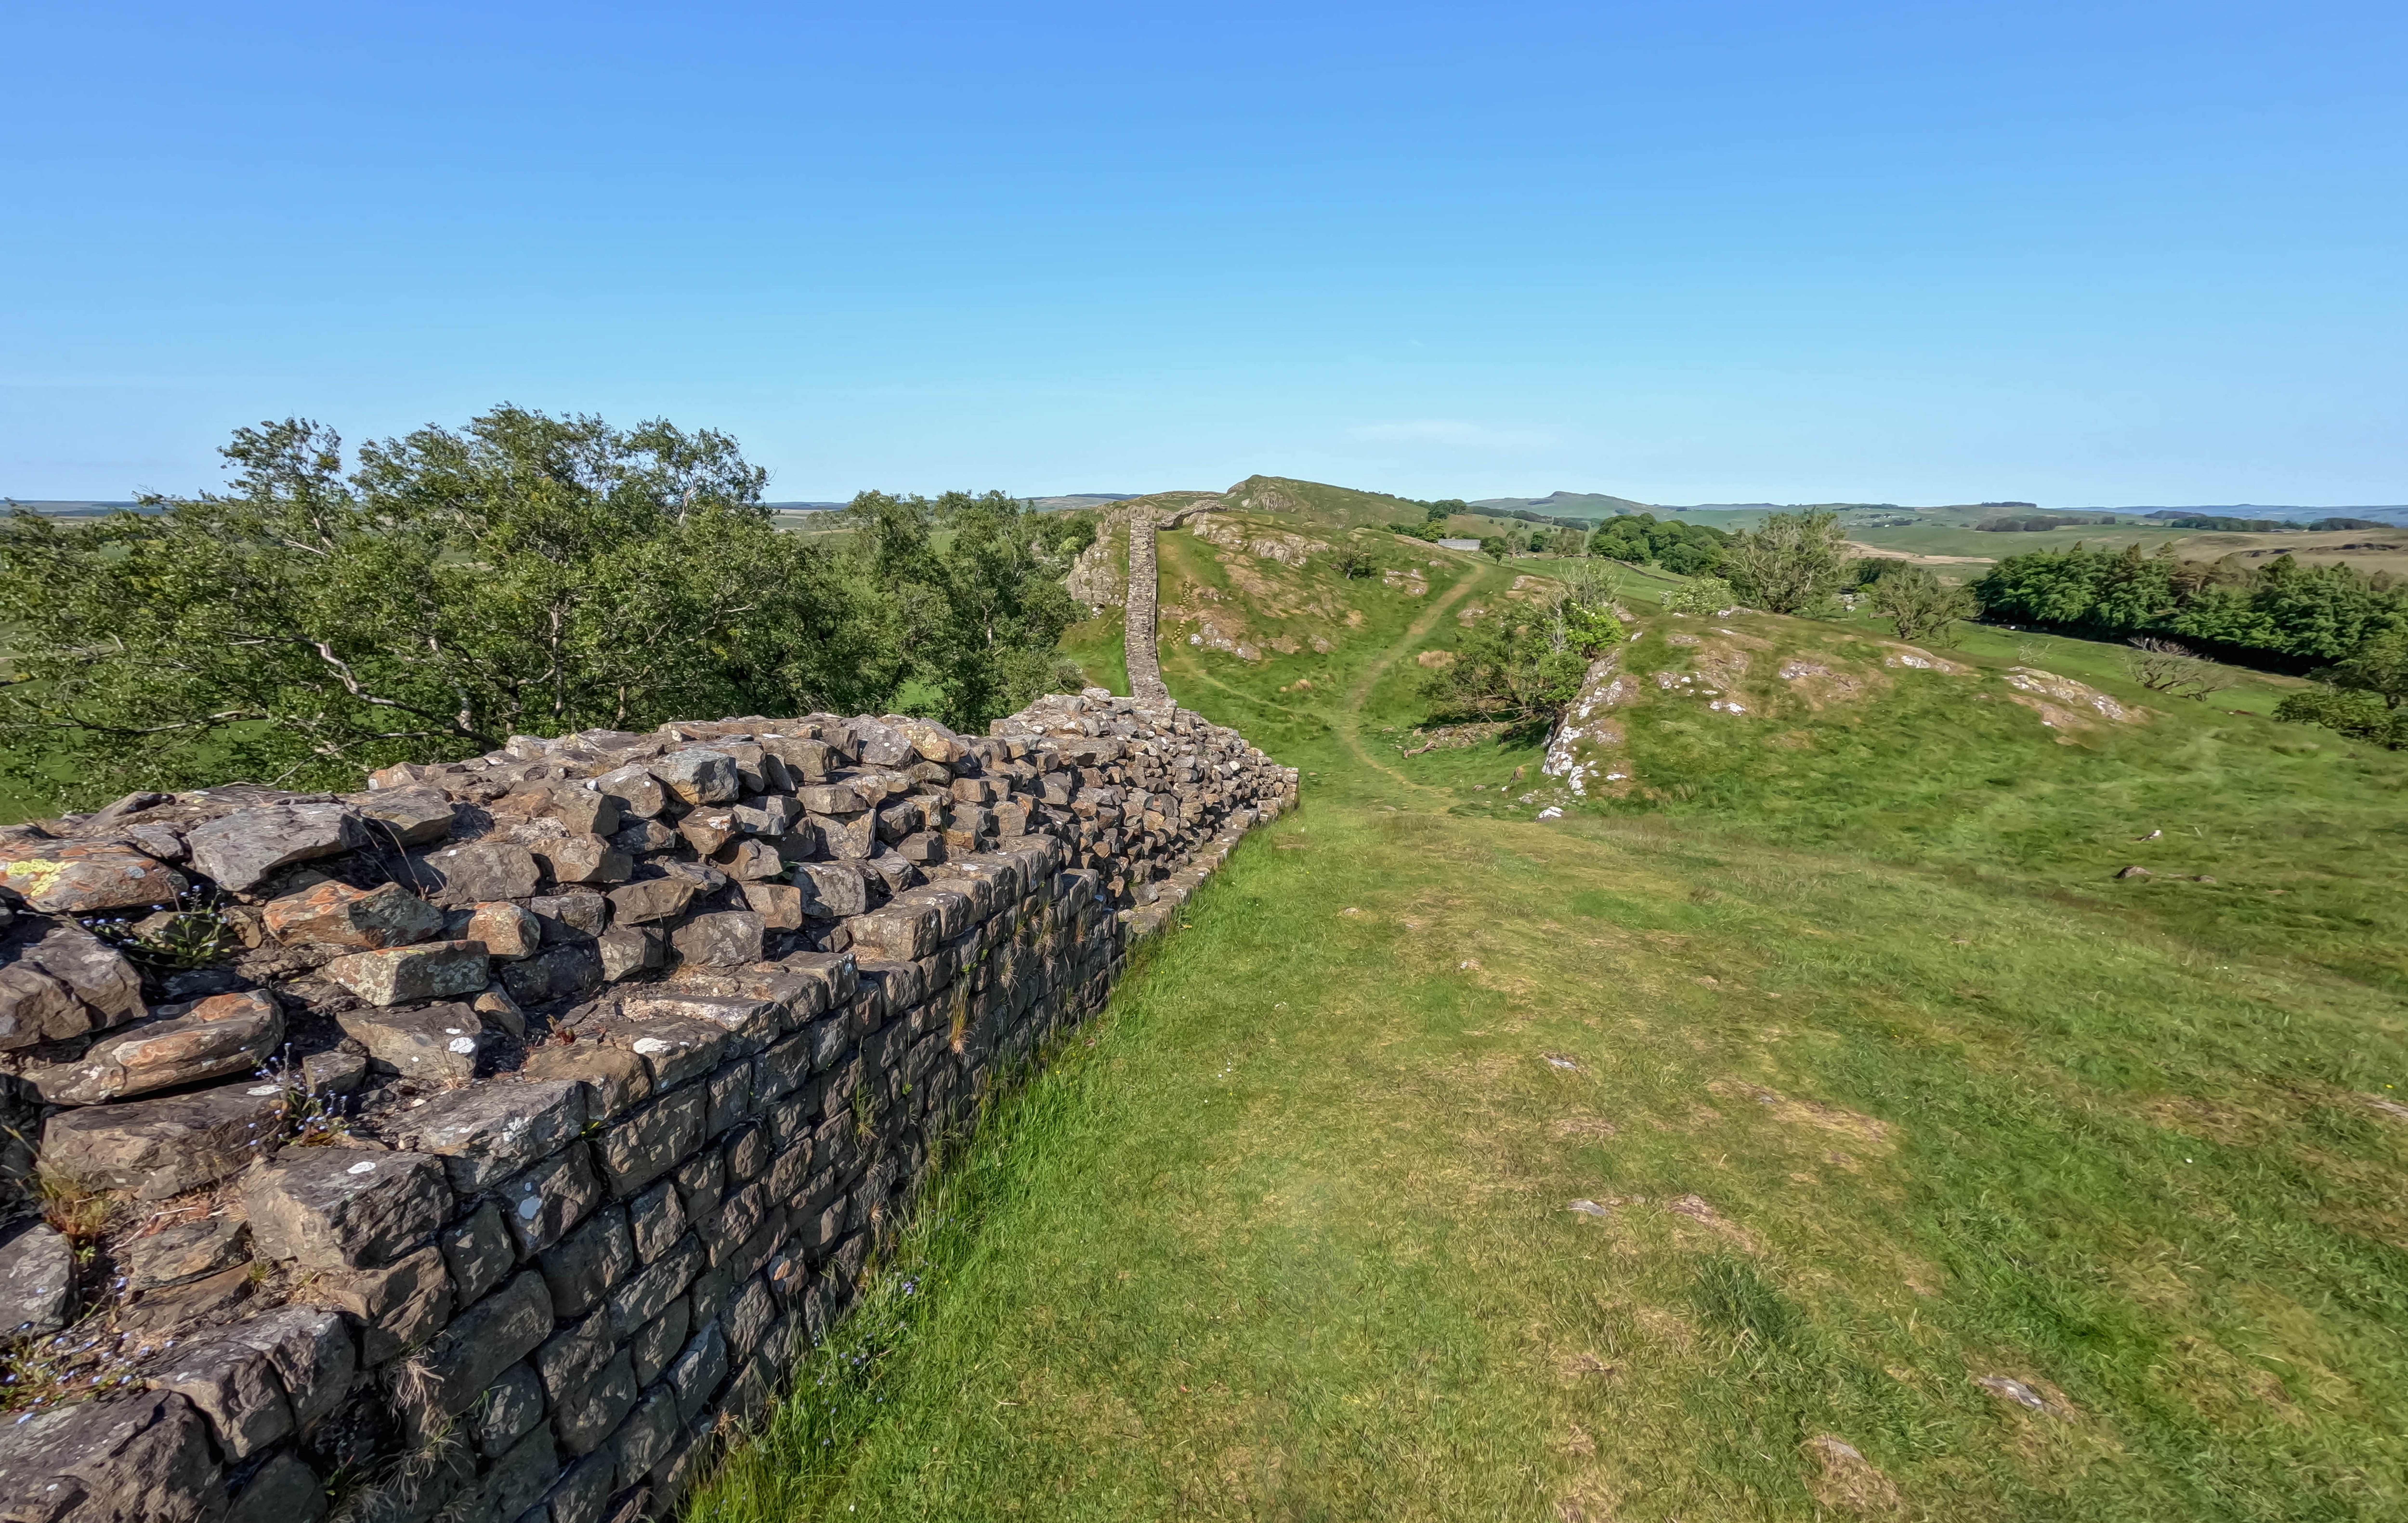 Hadrian's Wall is a unique Roman ruin in England. Check out the historical background of this under rated site. 
pictured: Hadrian's Wall in England